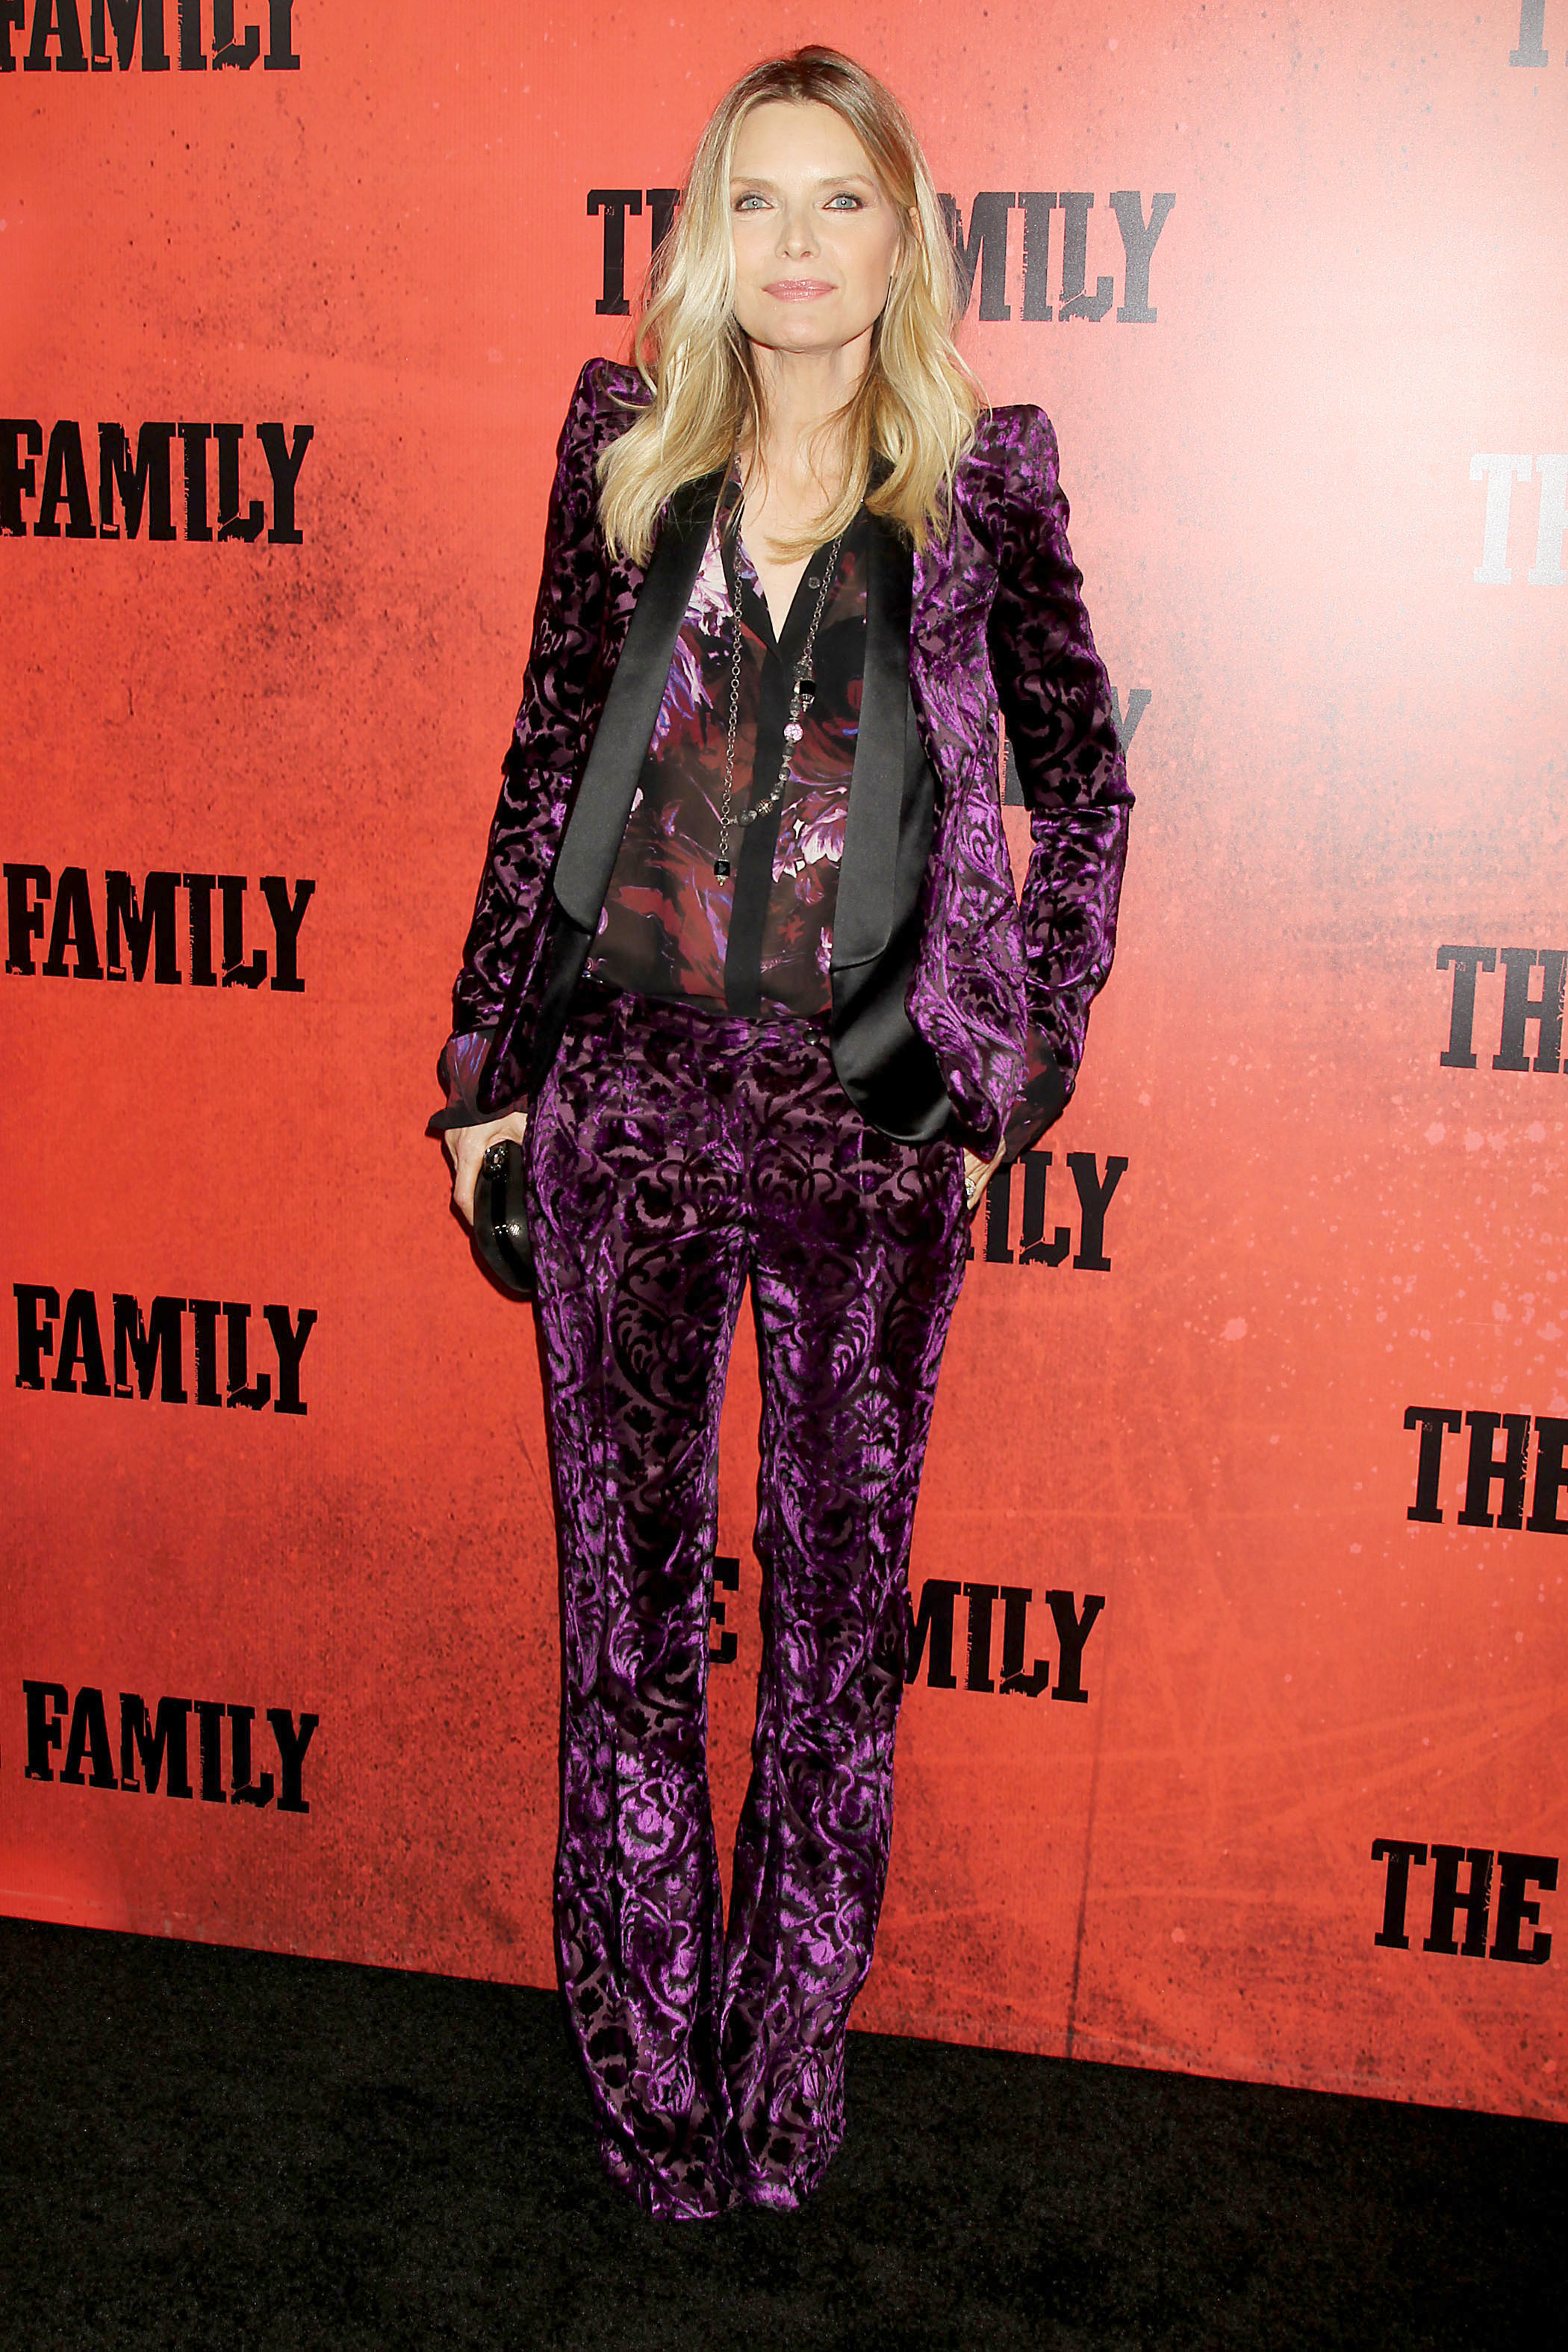 Michelle Pfeiffer - Relativity Media Presents the World Premiere of "The Family" in New York City